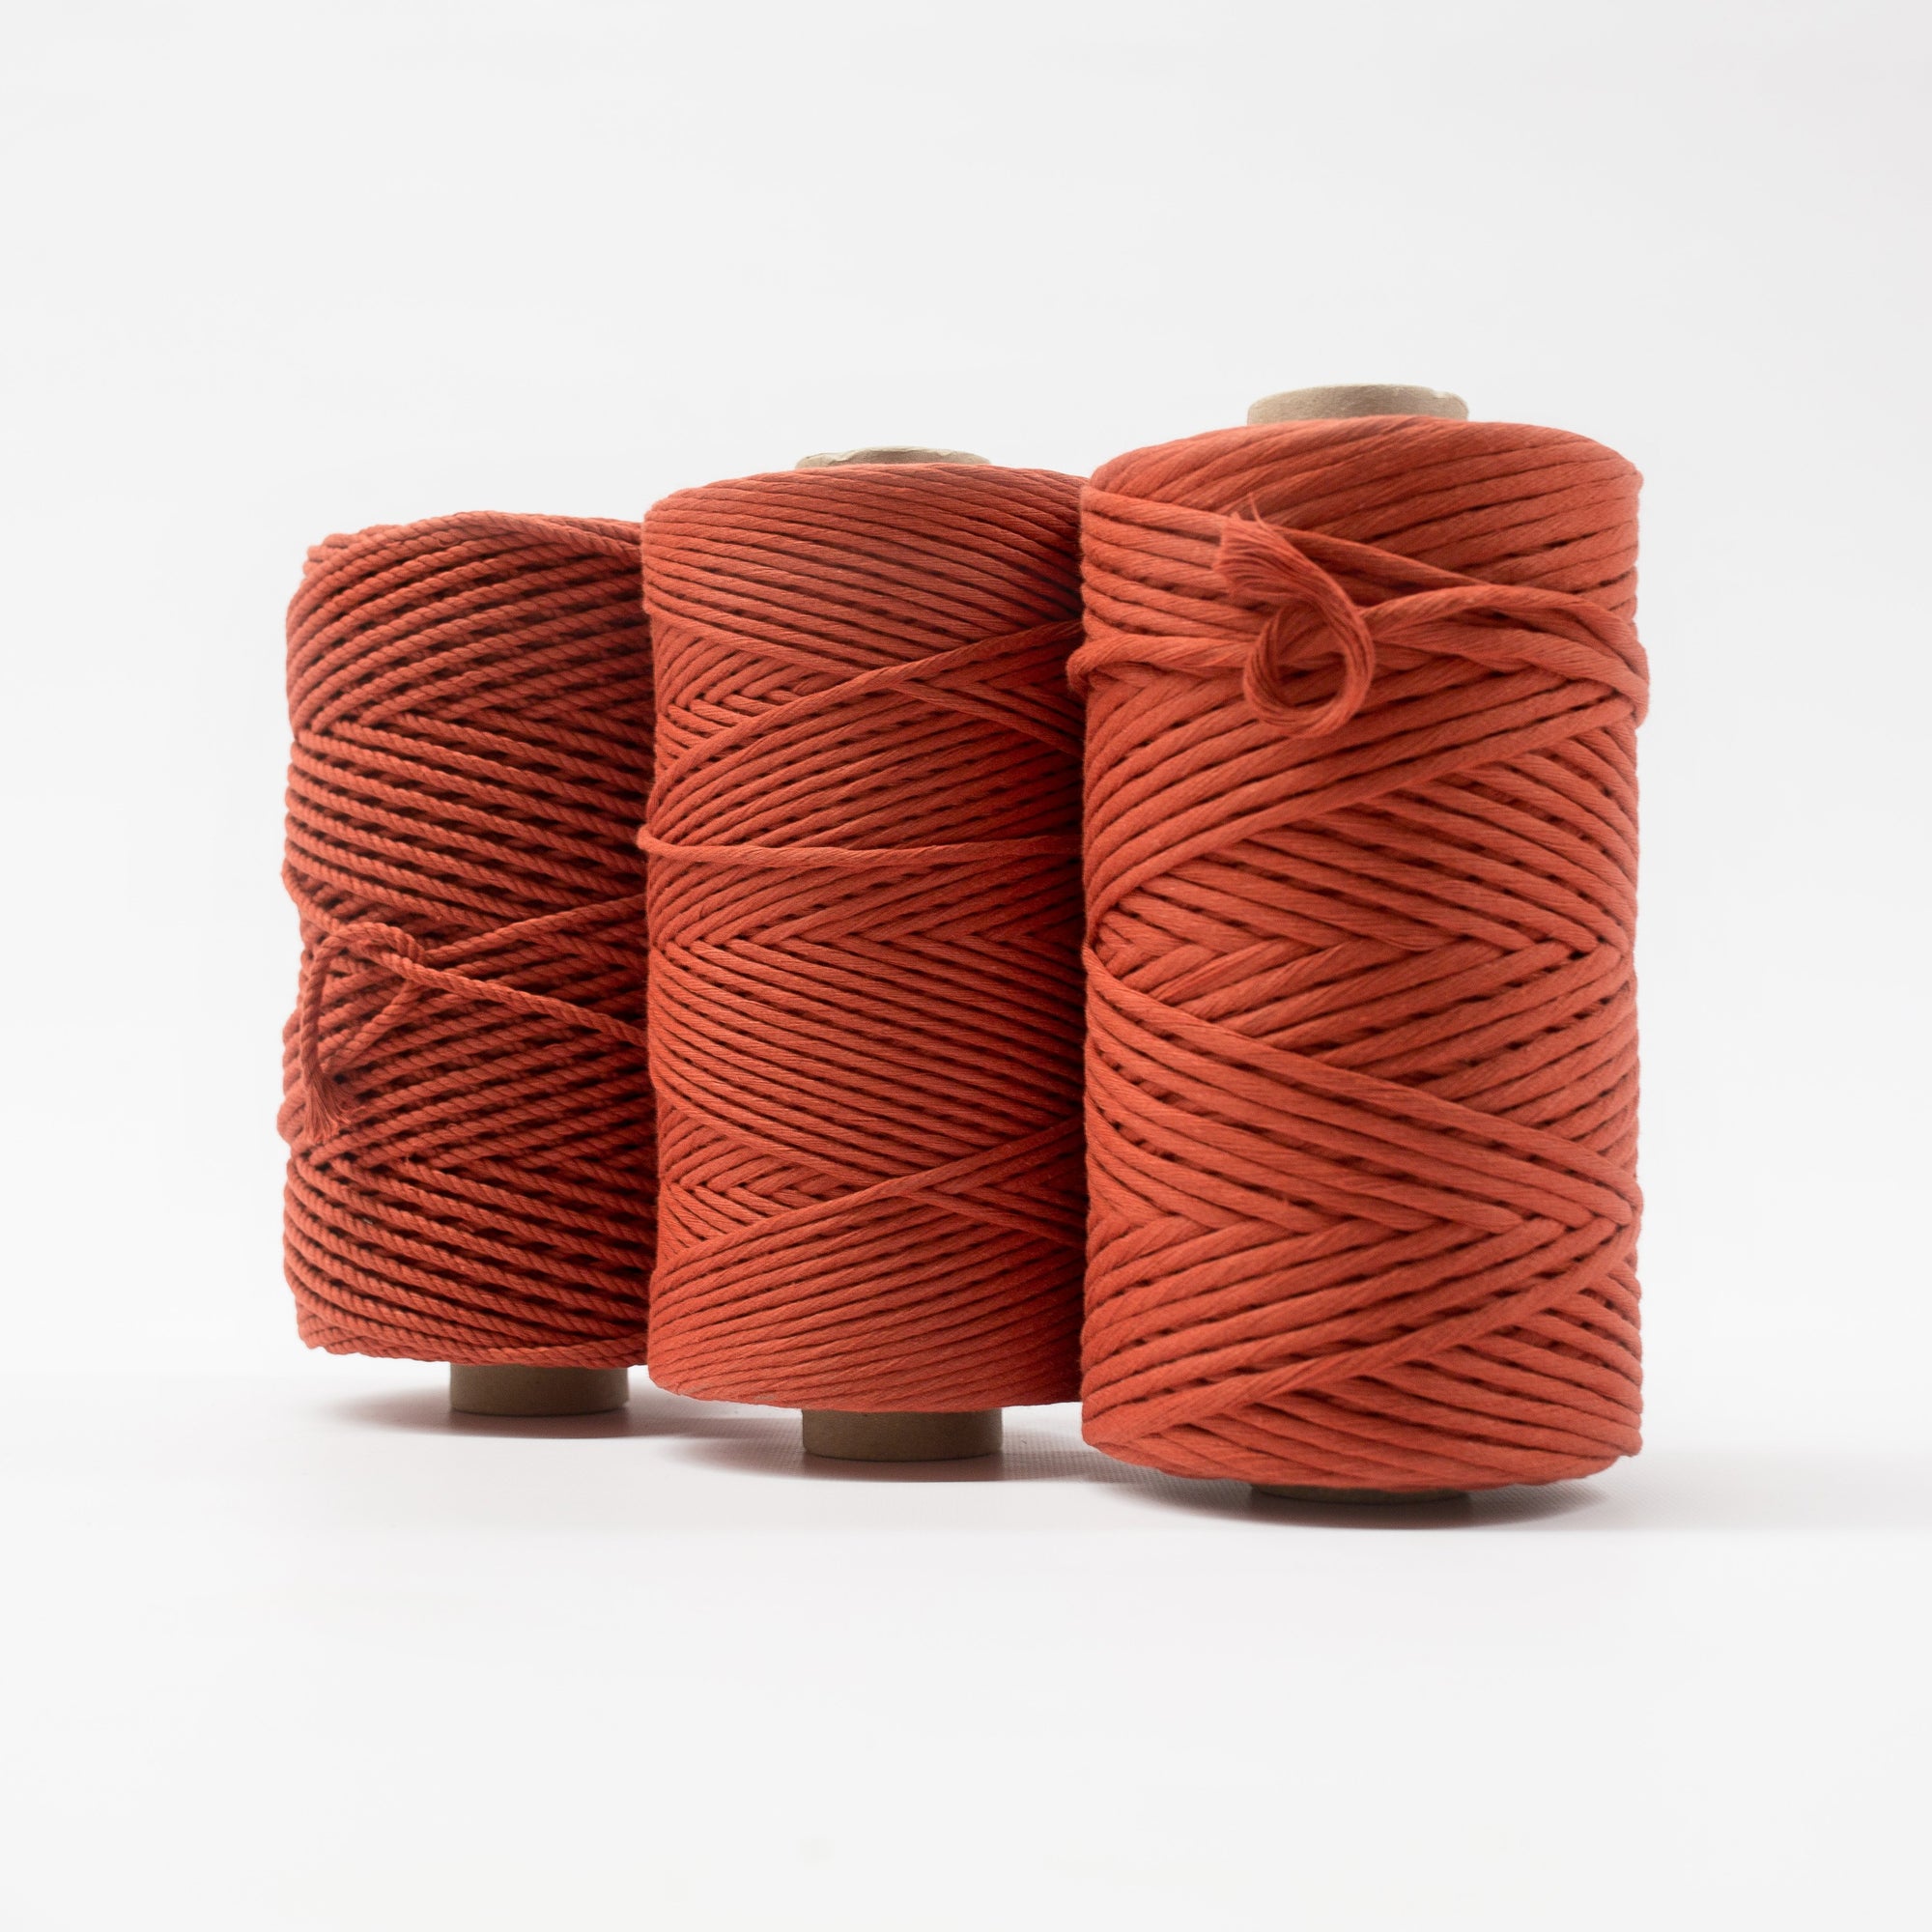 Mary Maker Studio Luxe Colour Cotton 4mm 1KG Recycled Luxe Macrame Rope // Copper macrame cotton macrame rope macrame workshop macrame patterns macrame